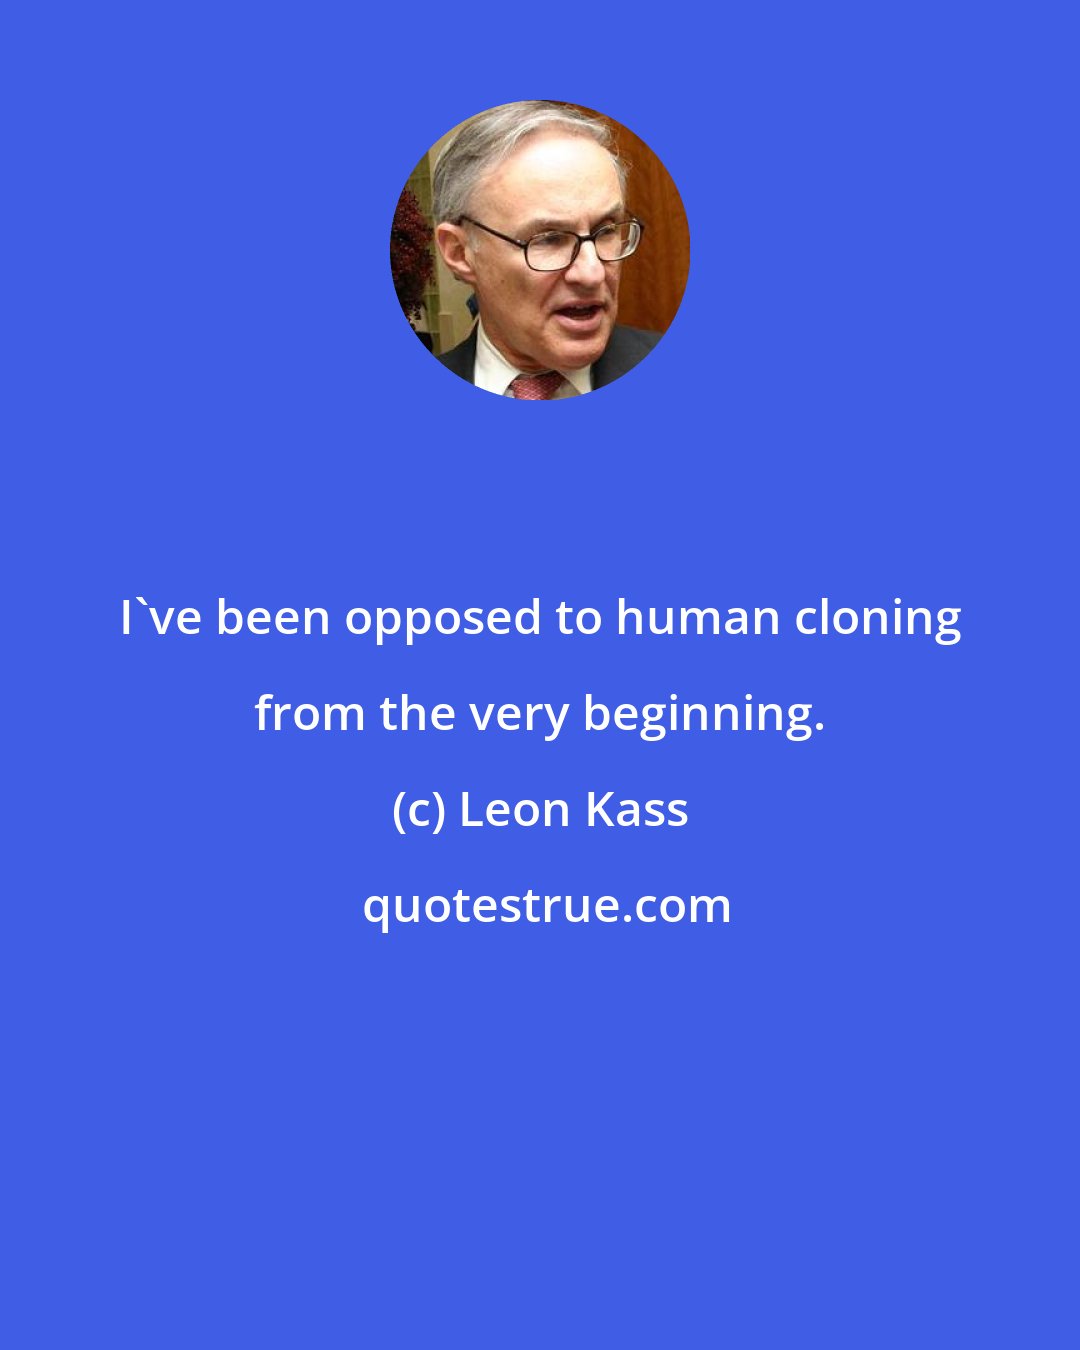 Leon Kass: I've been opposed to human cloning from the very beginning.